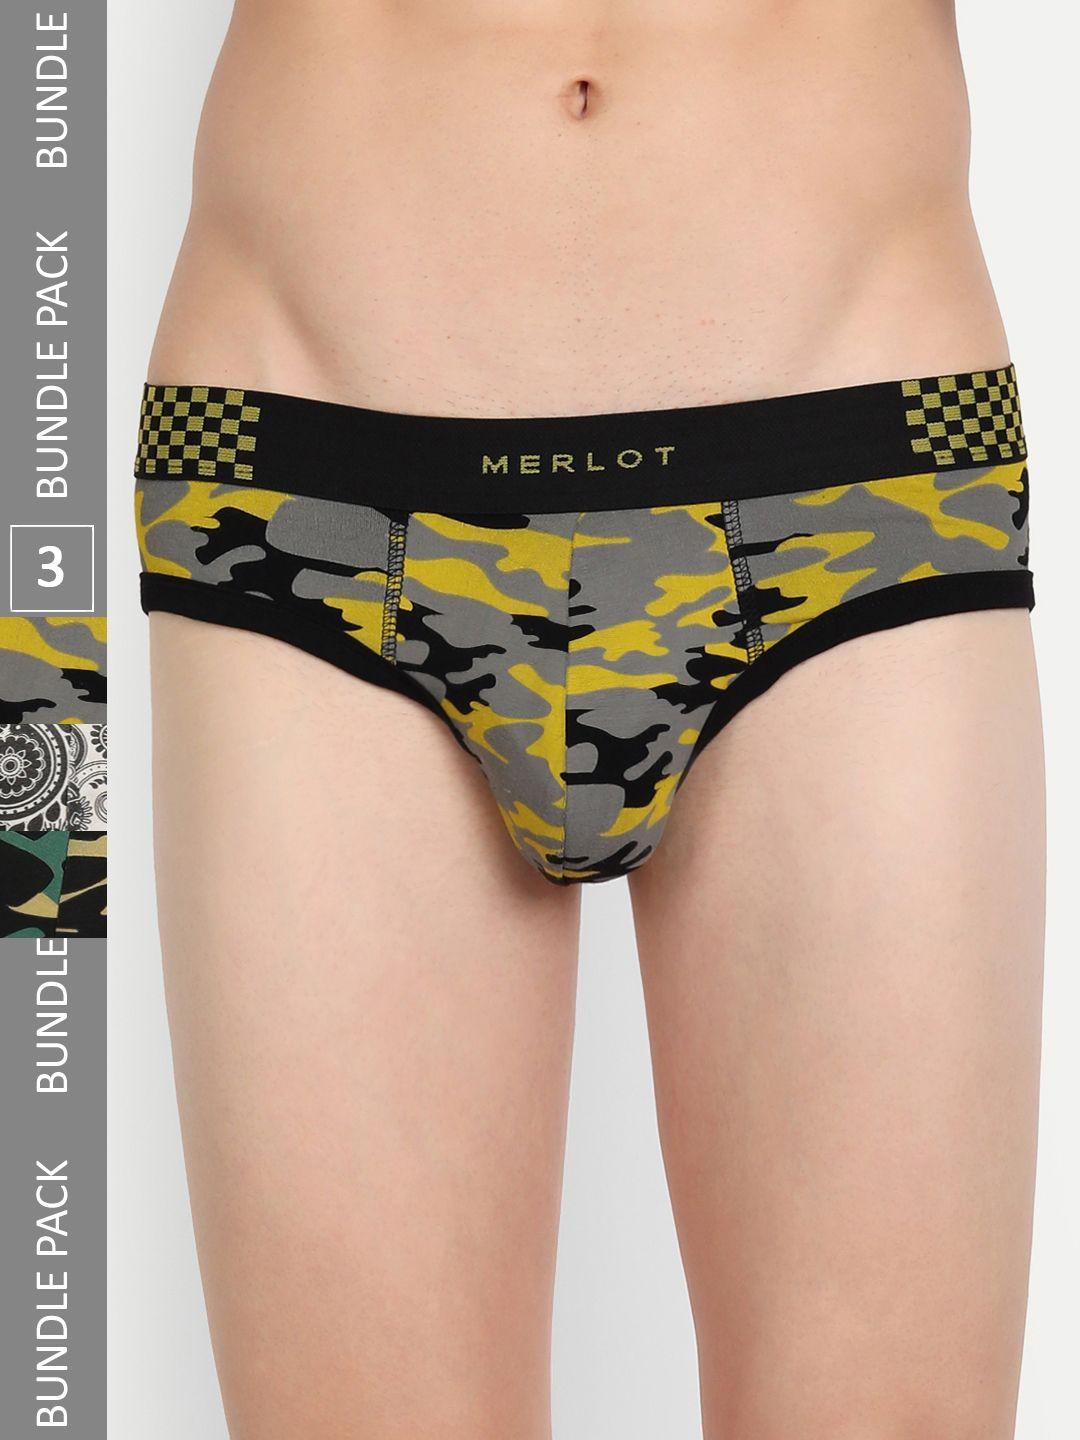 merlot pack of 3 assorted camouflage printed low rise ultra-soft & smooth basic briefs